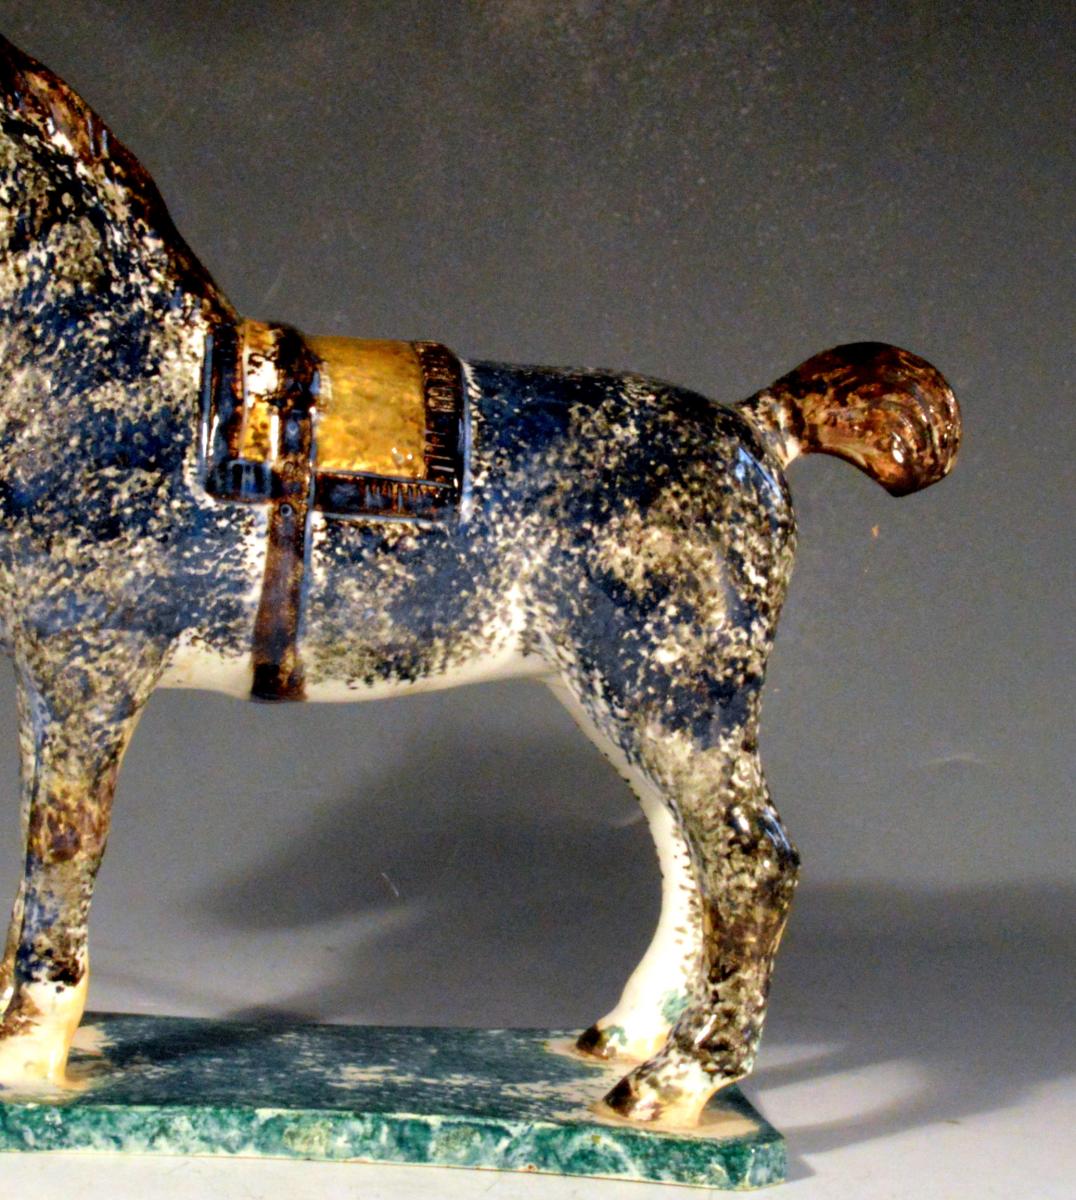 Newcastle Prattware Pottery Model of a Horse, St. Anthony Pottery, Newcastle upon Tyne. Circa 1800-20.